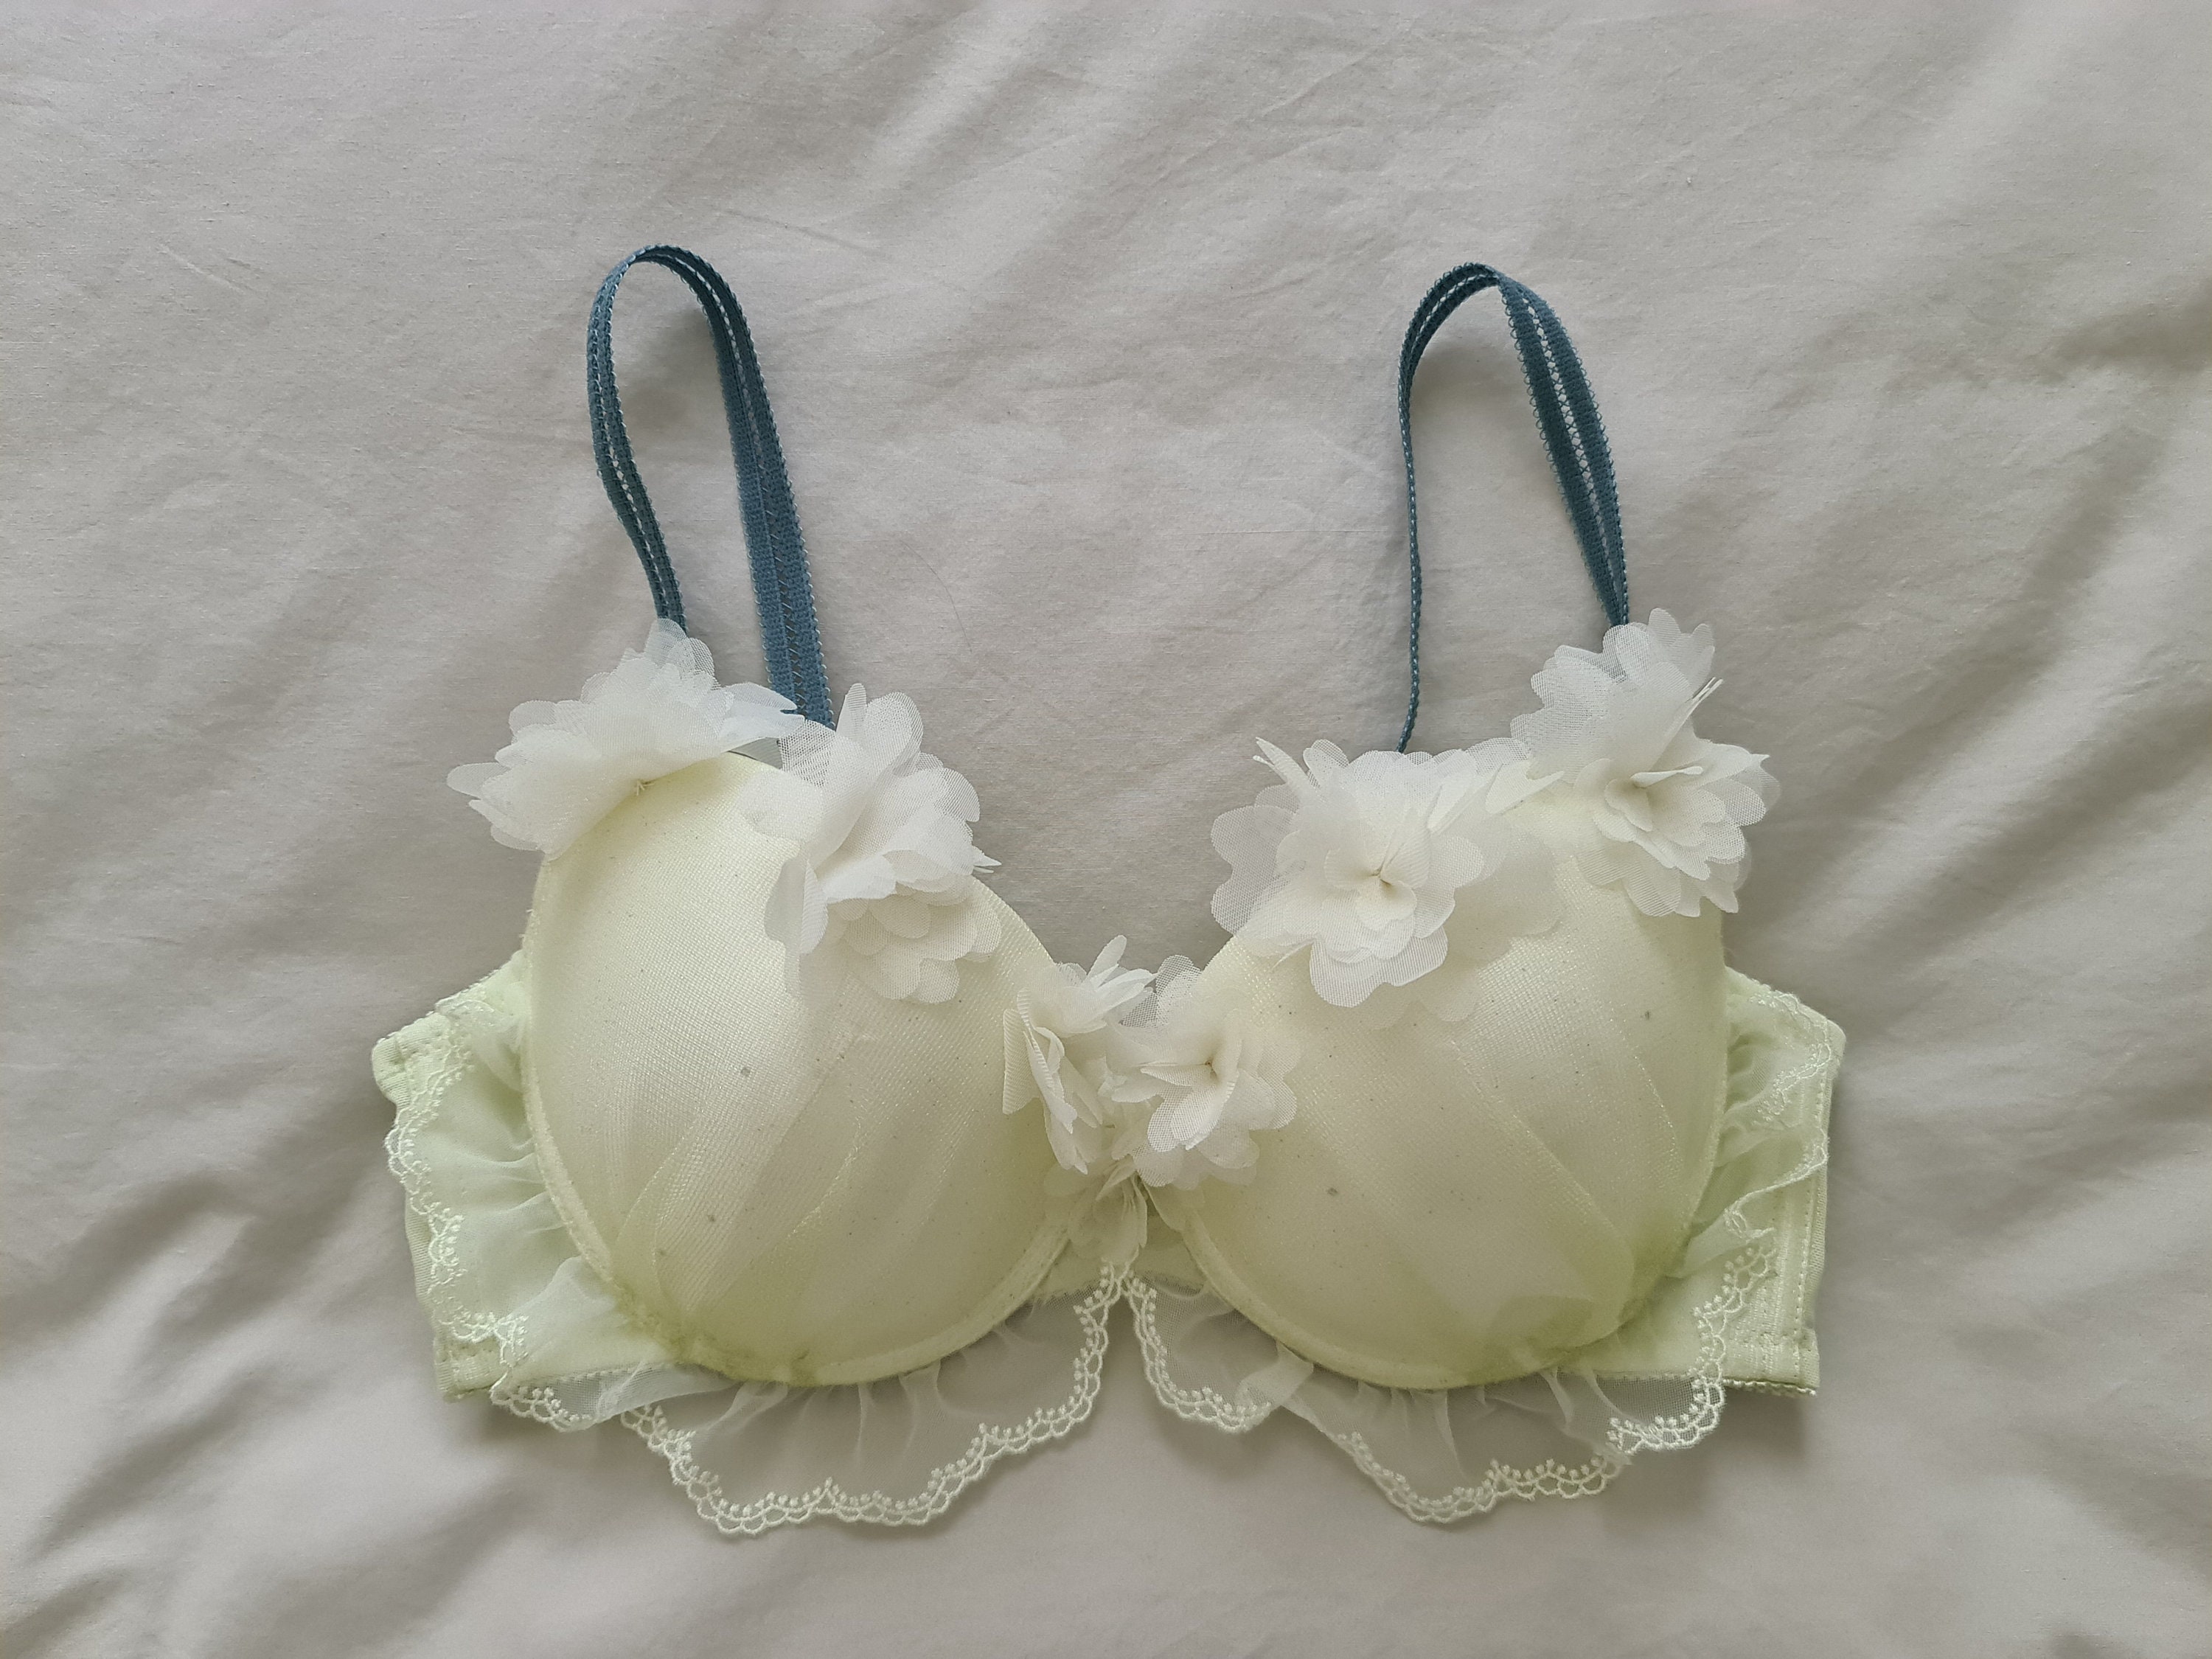 SOLD - White Butterfly 34C Rave Bra